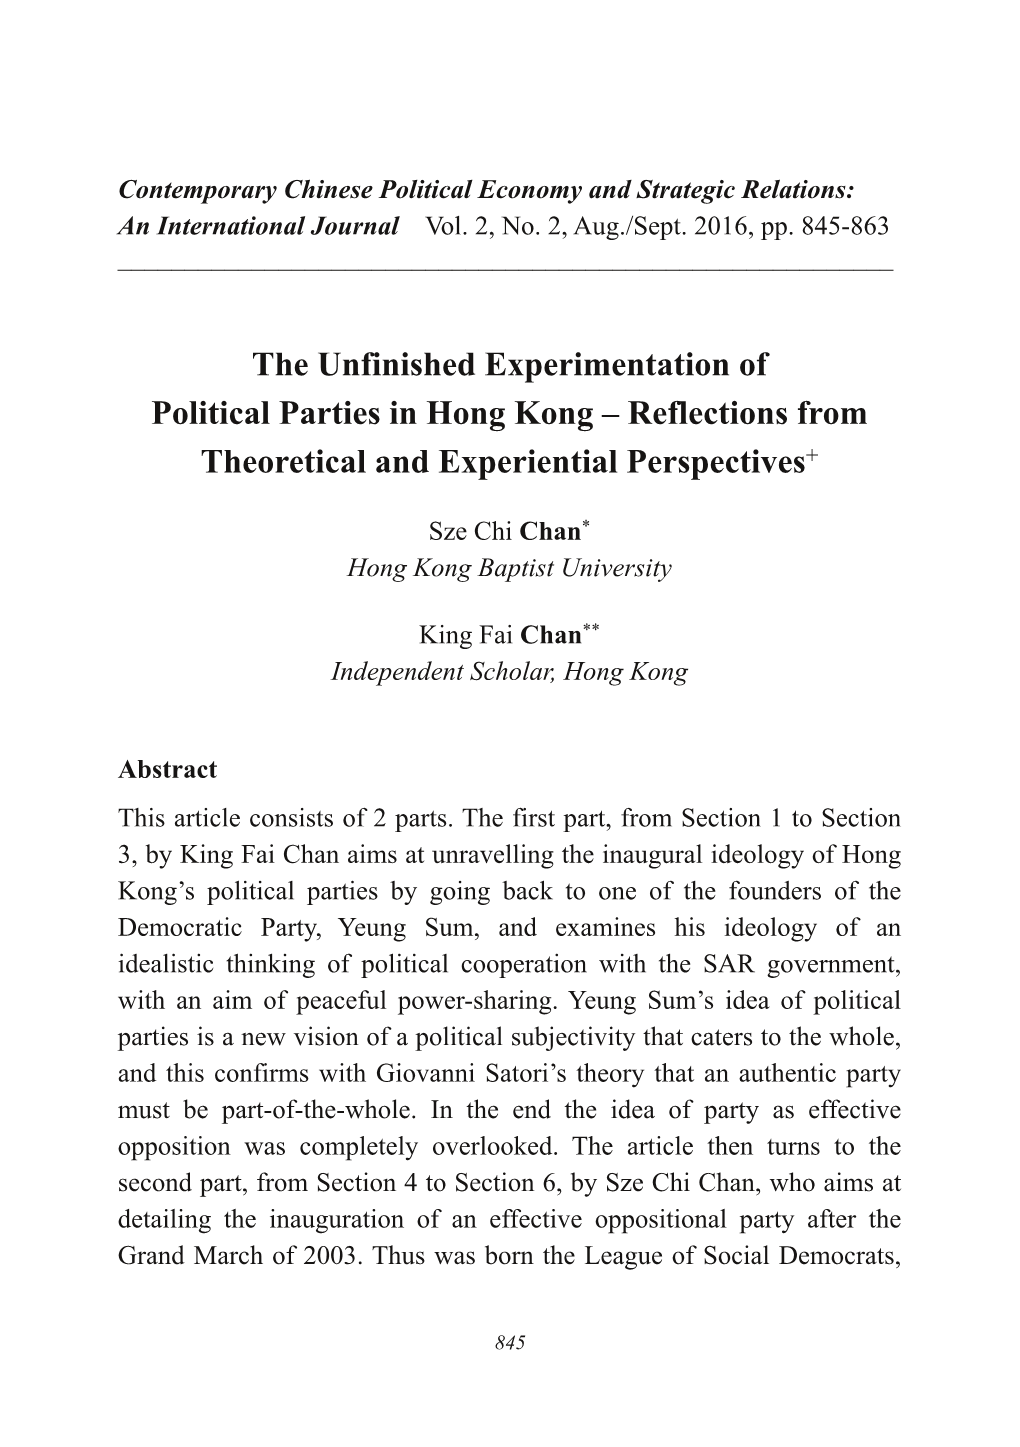 The Unfinished Experimentation of Political Parties in Hong Kong – Reflections from Theoretical and Experiential Perspectives+